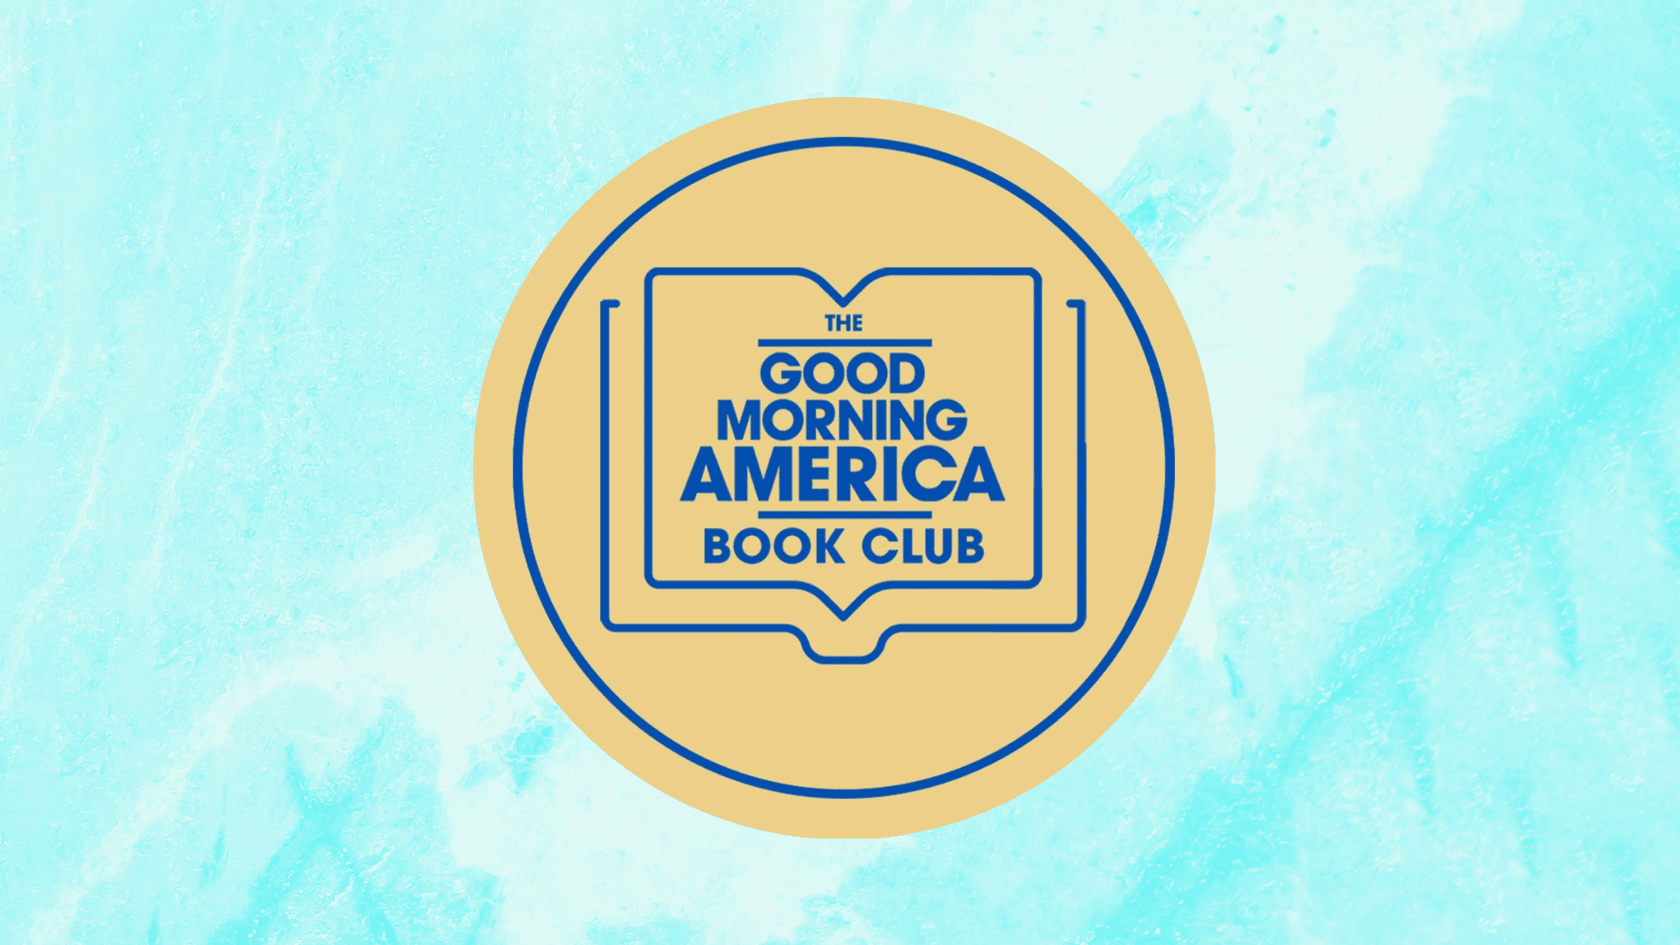 Good Morning America Book Club - Everything You Need To Know